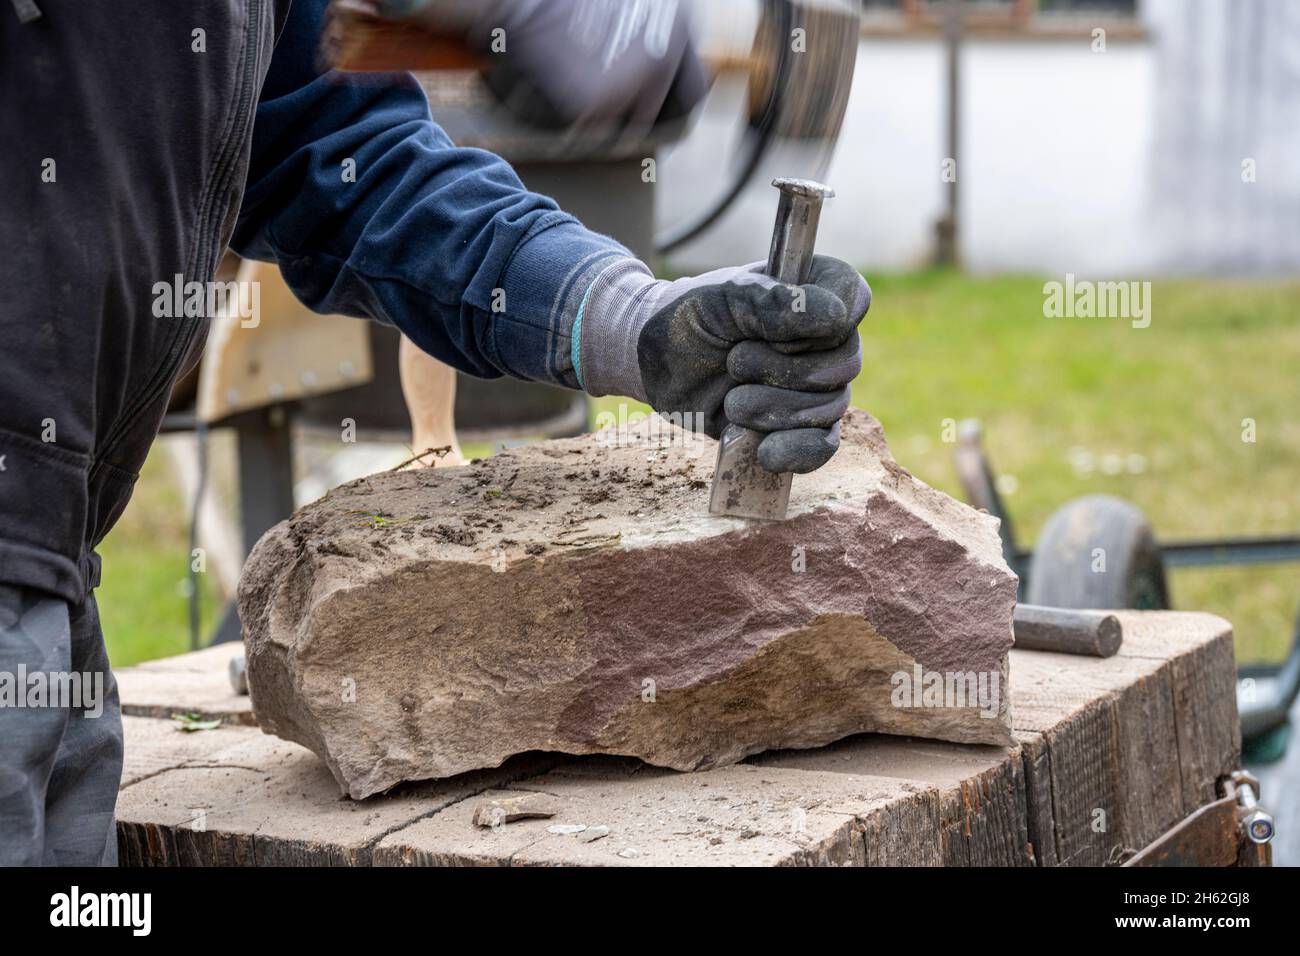 sandstone is being processed for a dry stone wall. Stock Photo